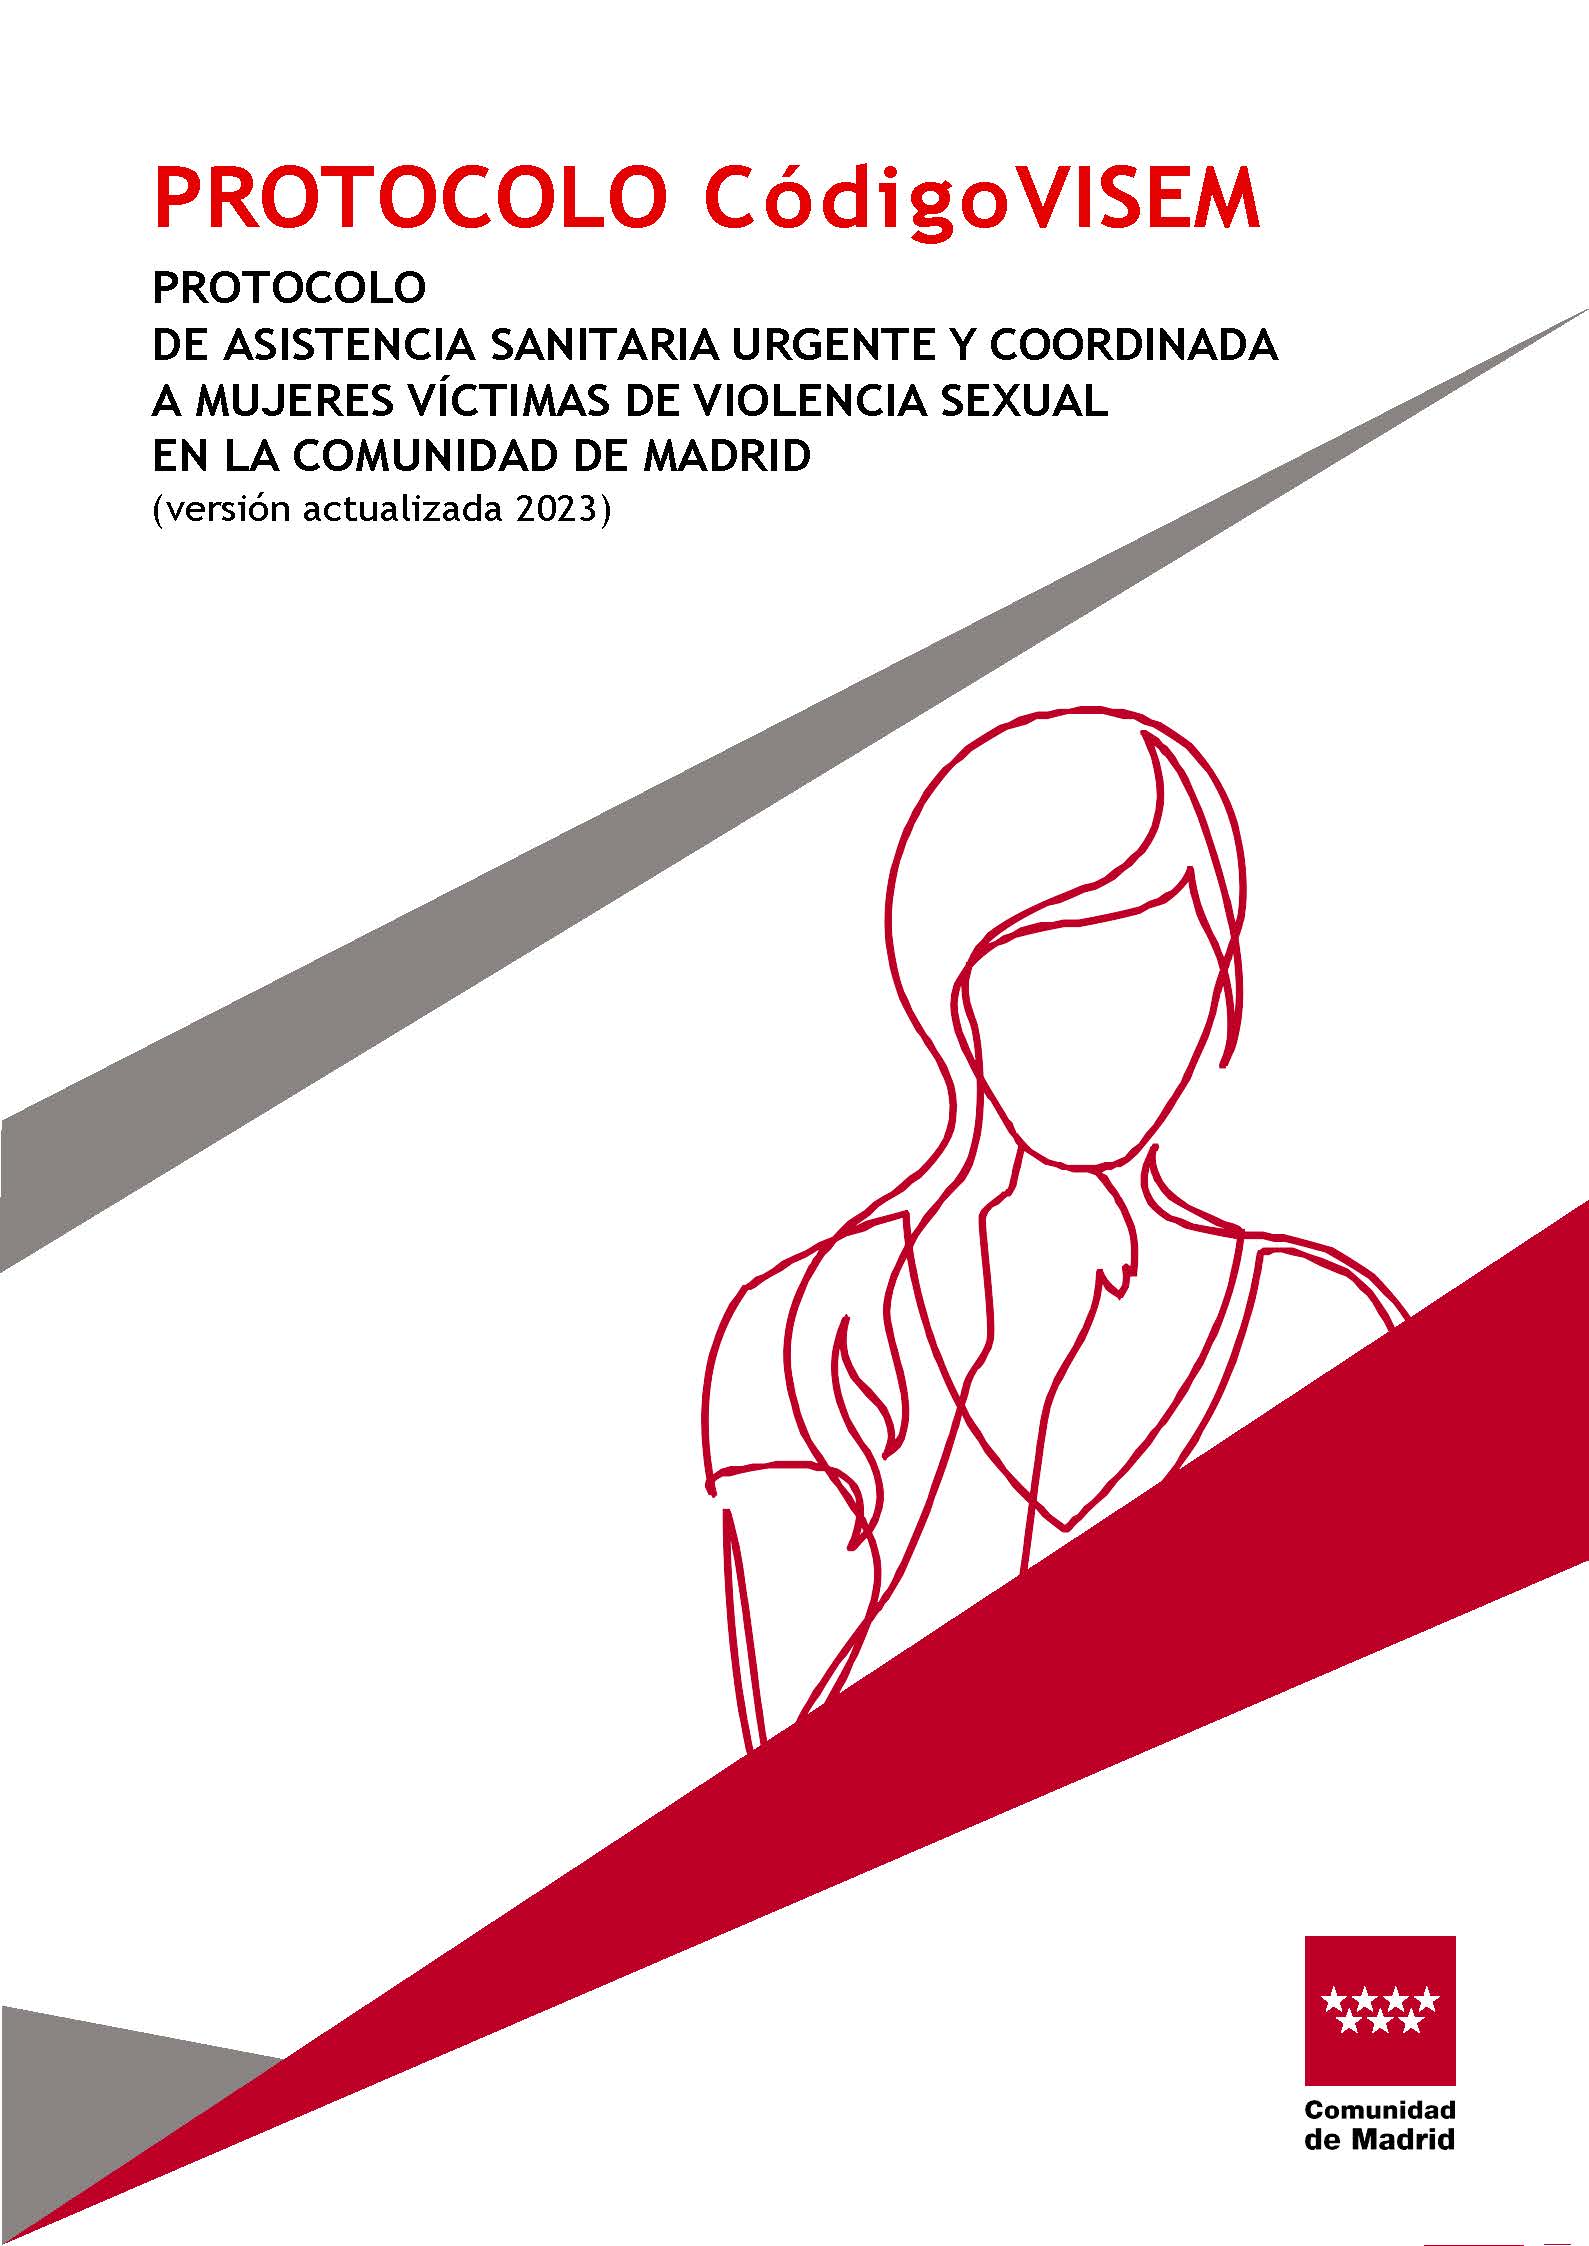 VISEM Code Protocol Cover. Protocol for urgent and coordinated health care for women victims of sexual violence in the Community of Madrid (updated version 2023)